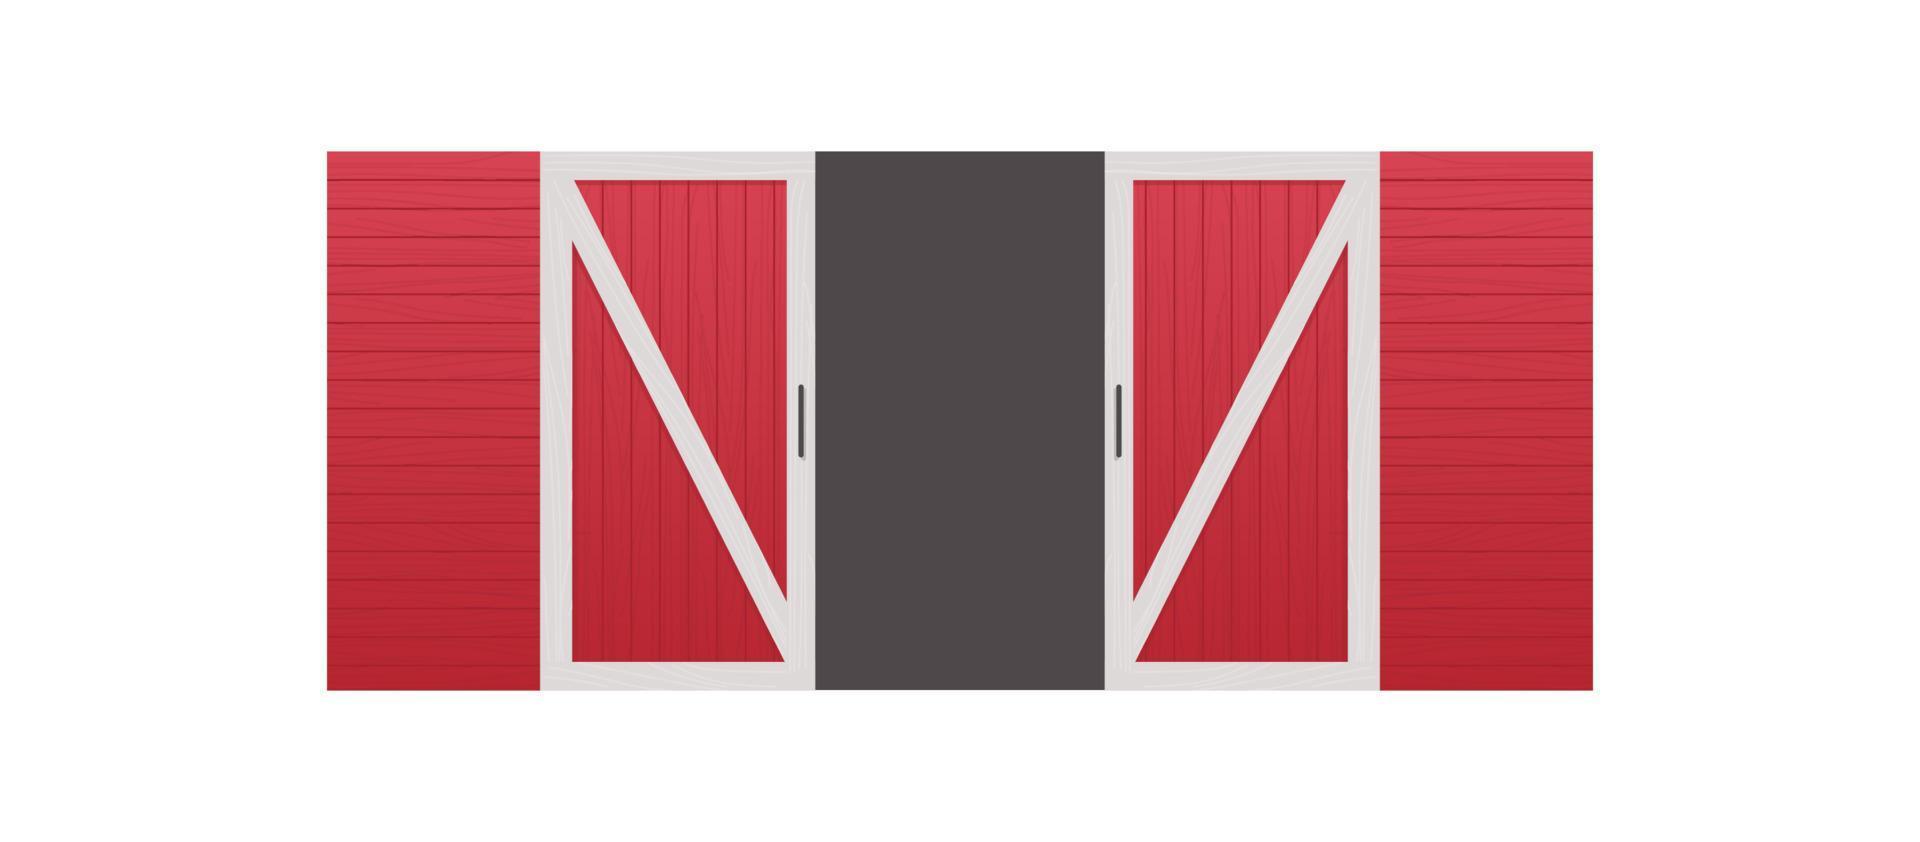 Red wooden barn door front view and farm warehouse building cartoon concept horizontal flat vector illustration.